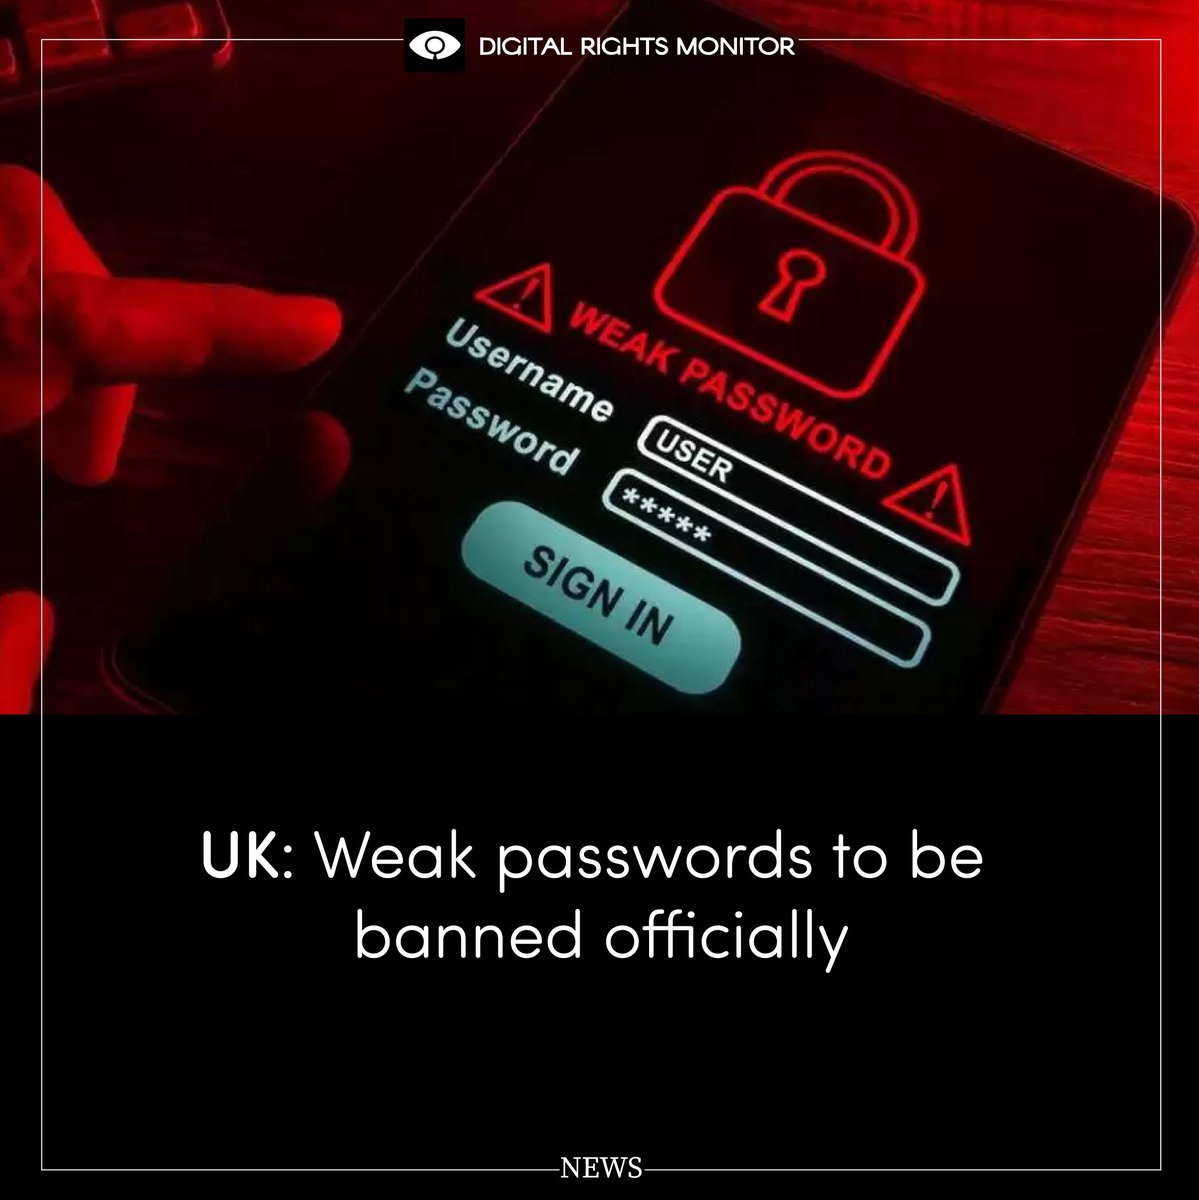 'Manufacturers will be banned from having weak, easily guessable default passwords like 'admin' or '12345' and if there is a common password the user will be promoted to change it on start-up,' says govt. Read: digitalrightsmonitor.pk/uk-devices-wit…